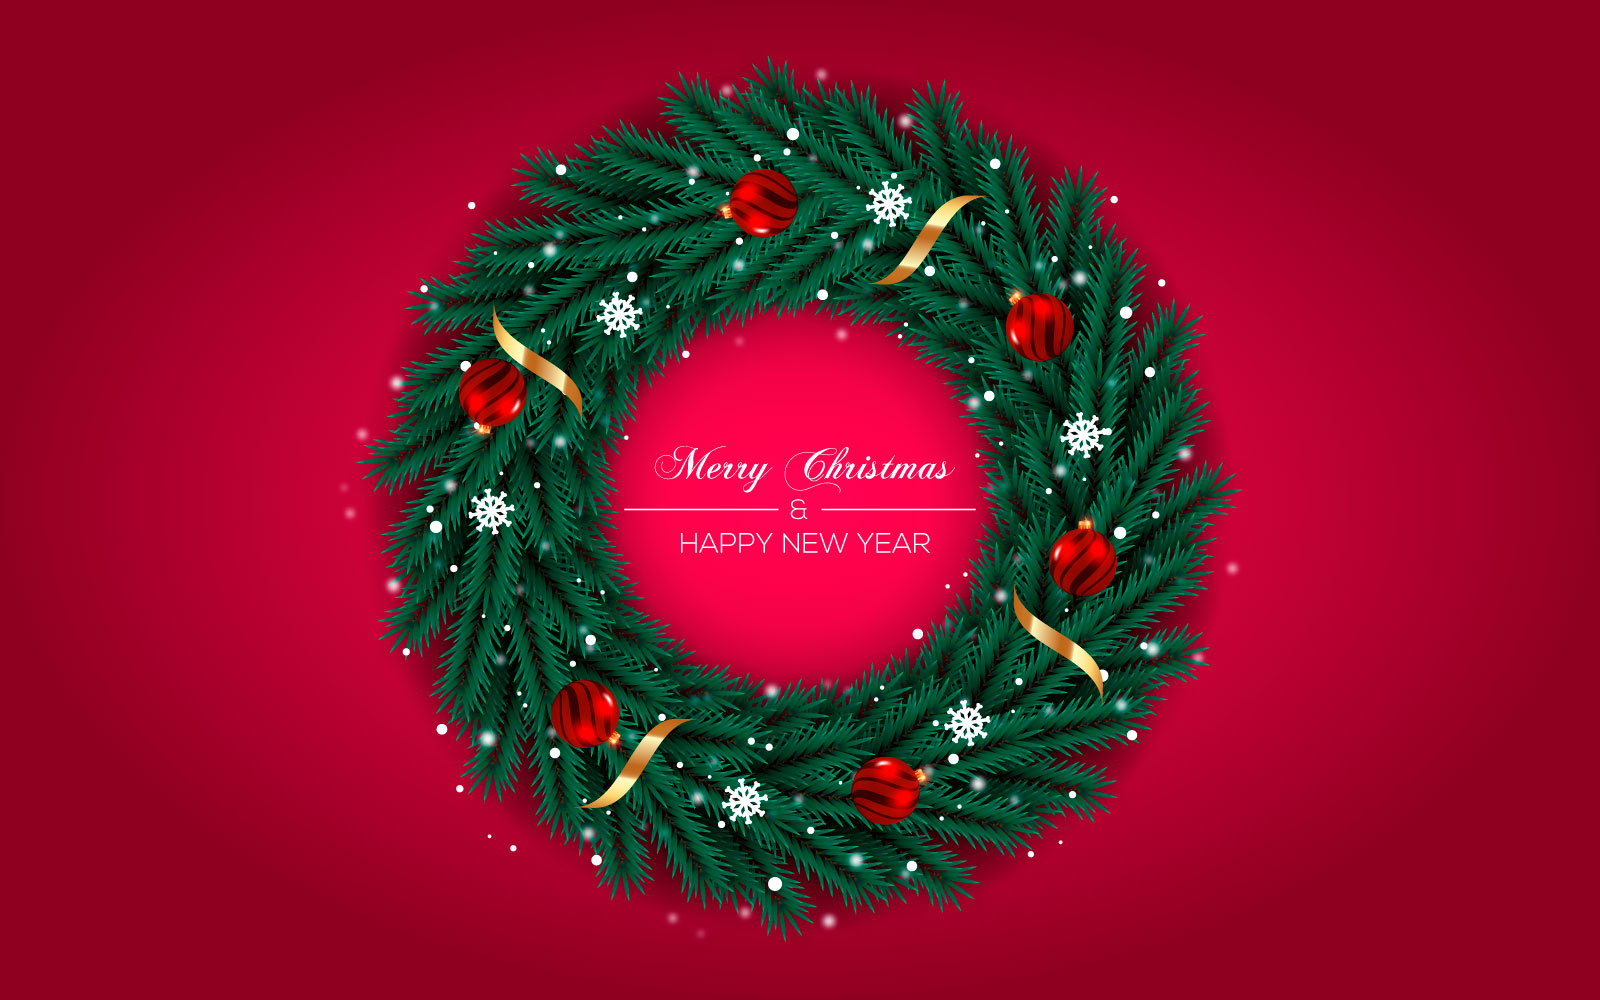 Christmas Wreath Decoration With Pine Branch Christmas Ball And Red Golden Color Ribbon